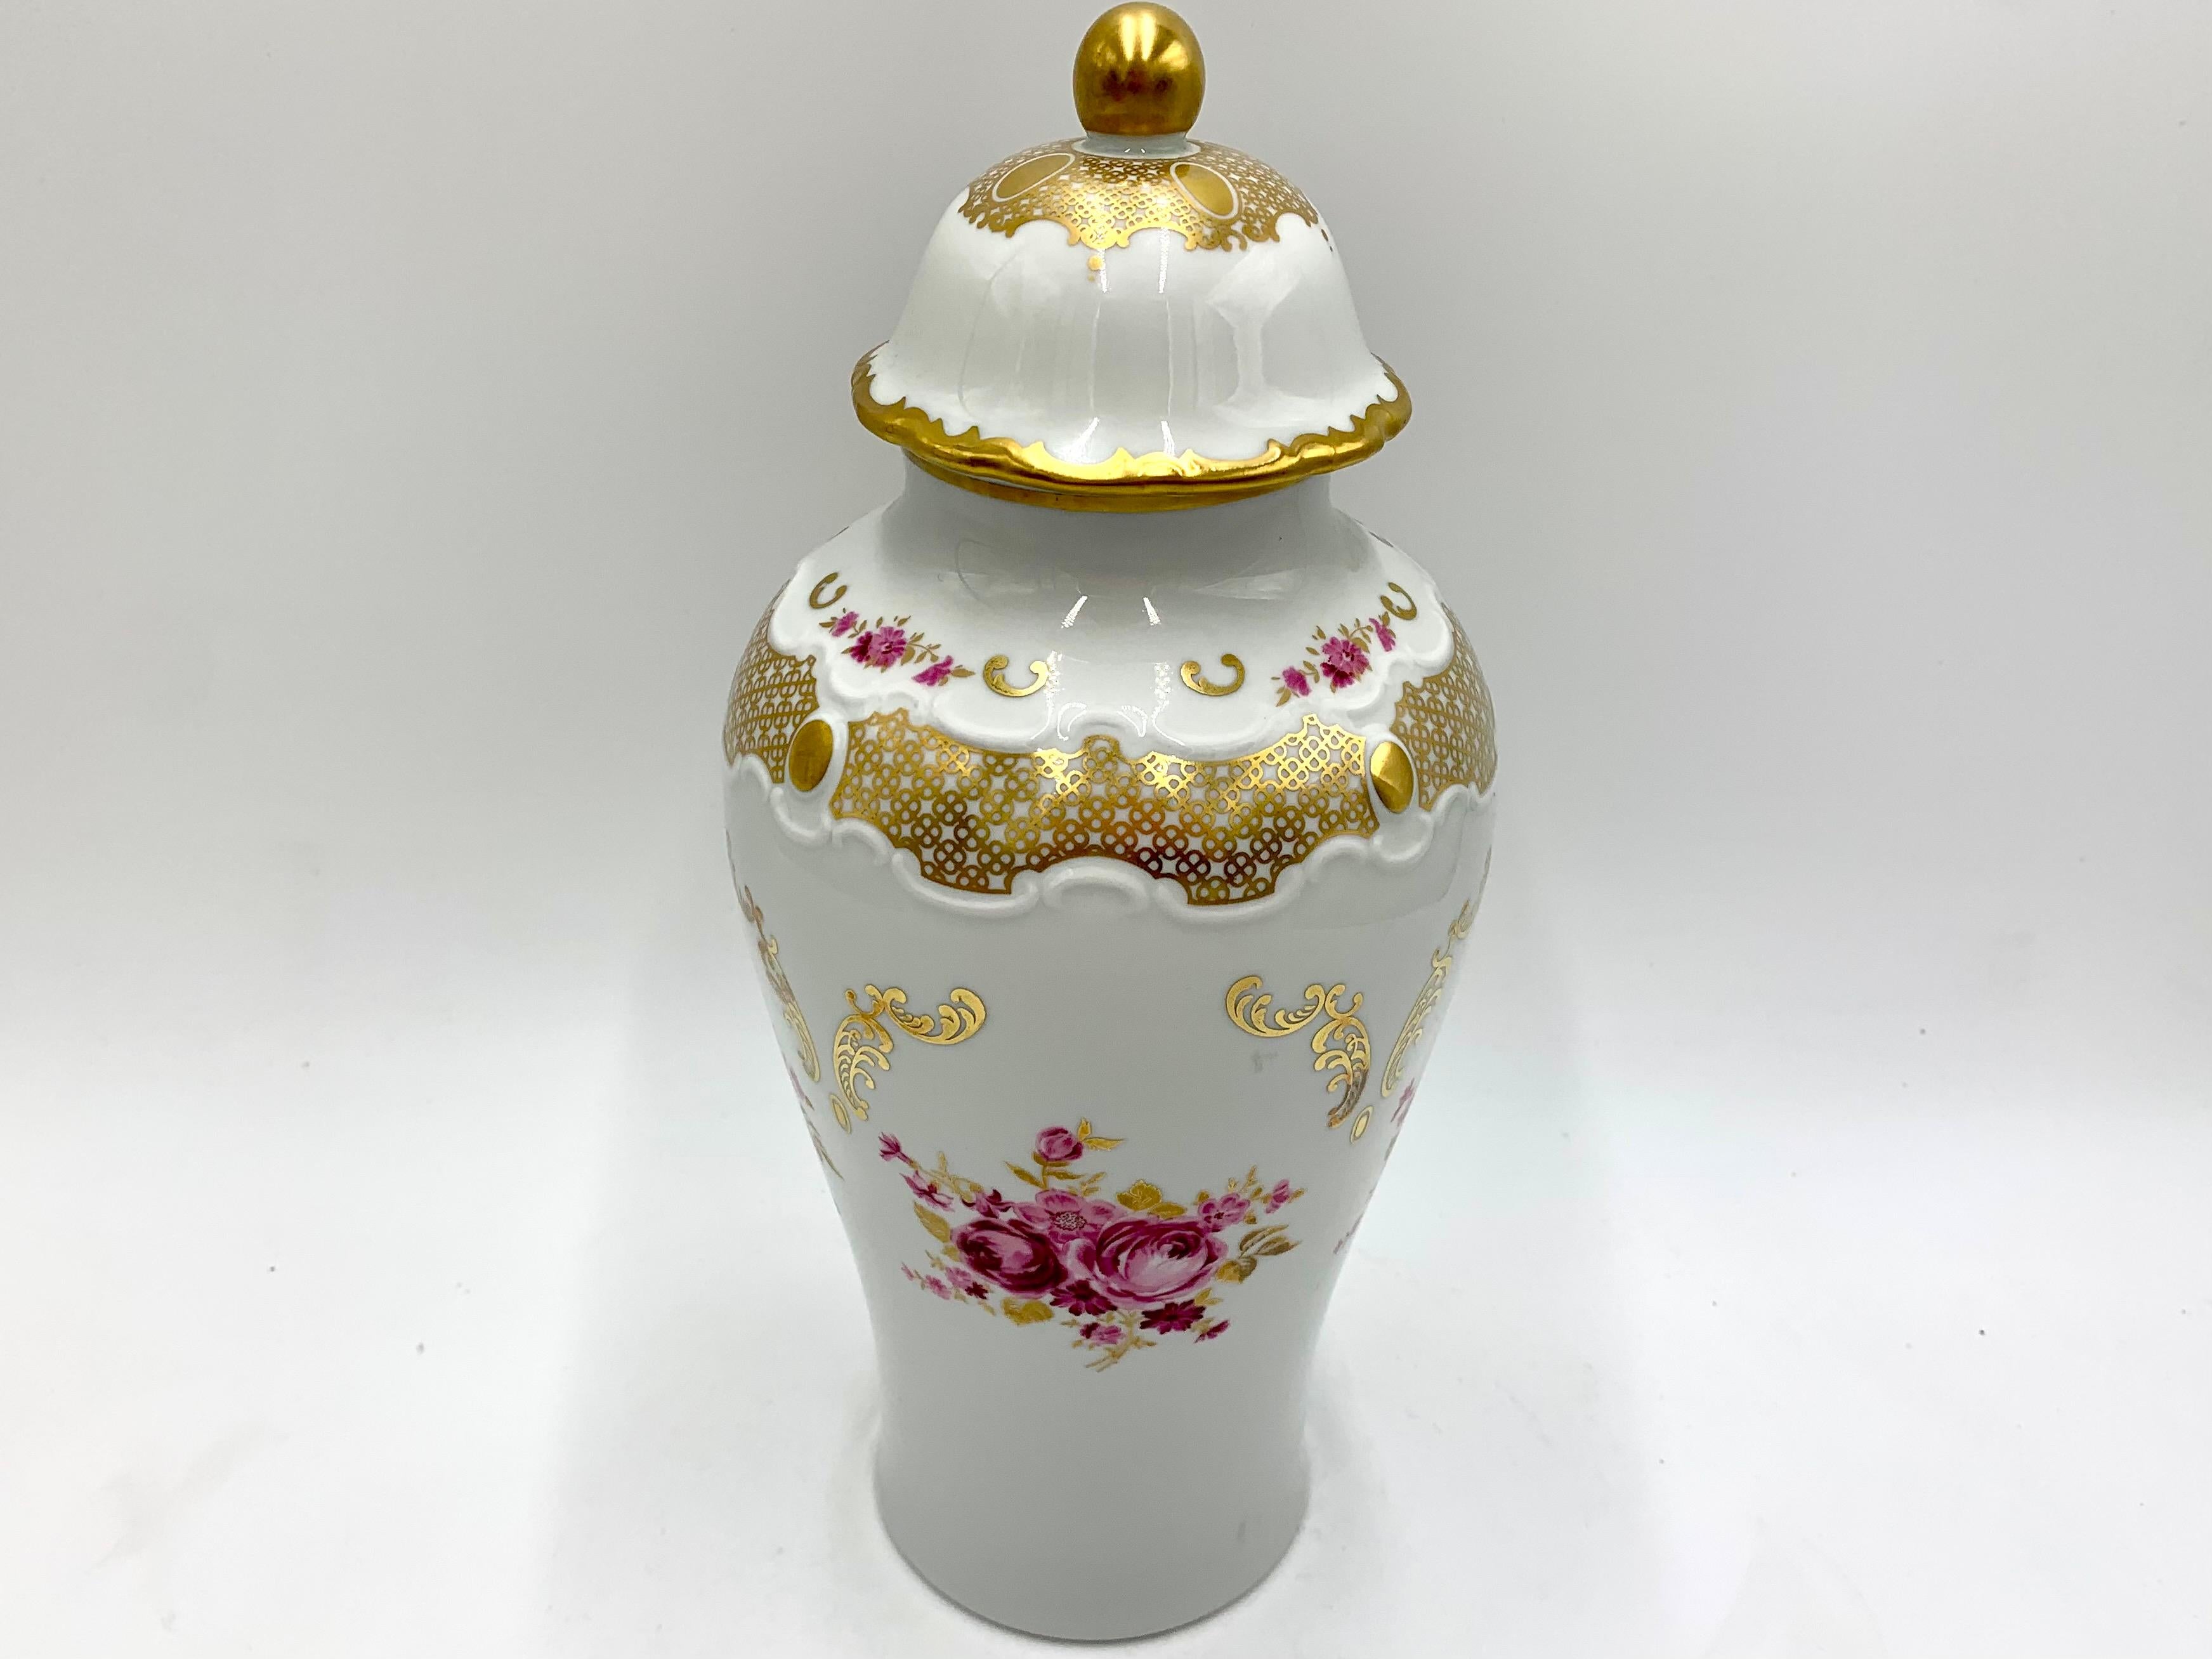 A beautiful amphora with a gilded cover.

Signed Wallendorf Schaubach.

No damage, very good condition.

Measure: Height with the lid 31 cm, without the lid 25 cm, diameter 15 cm.